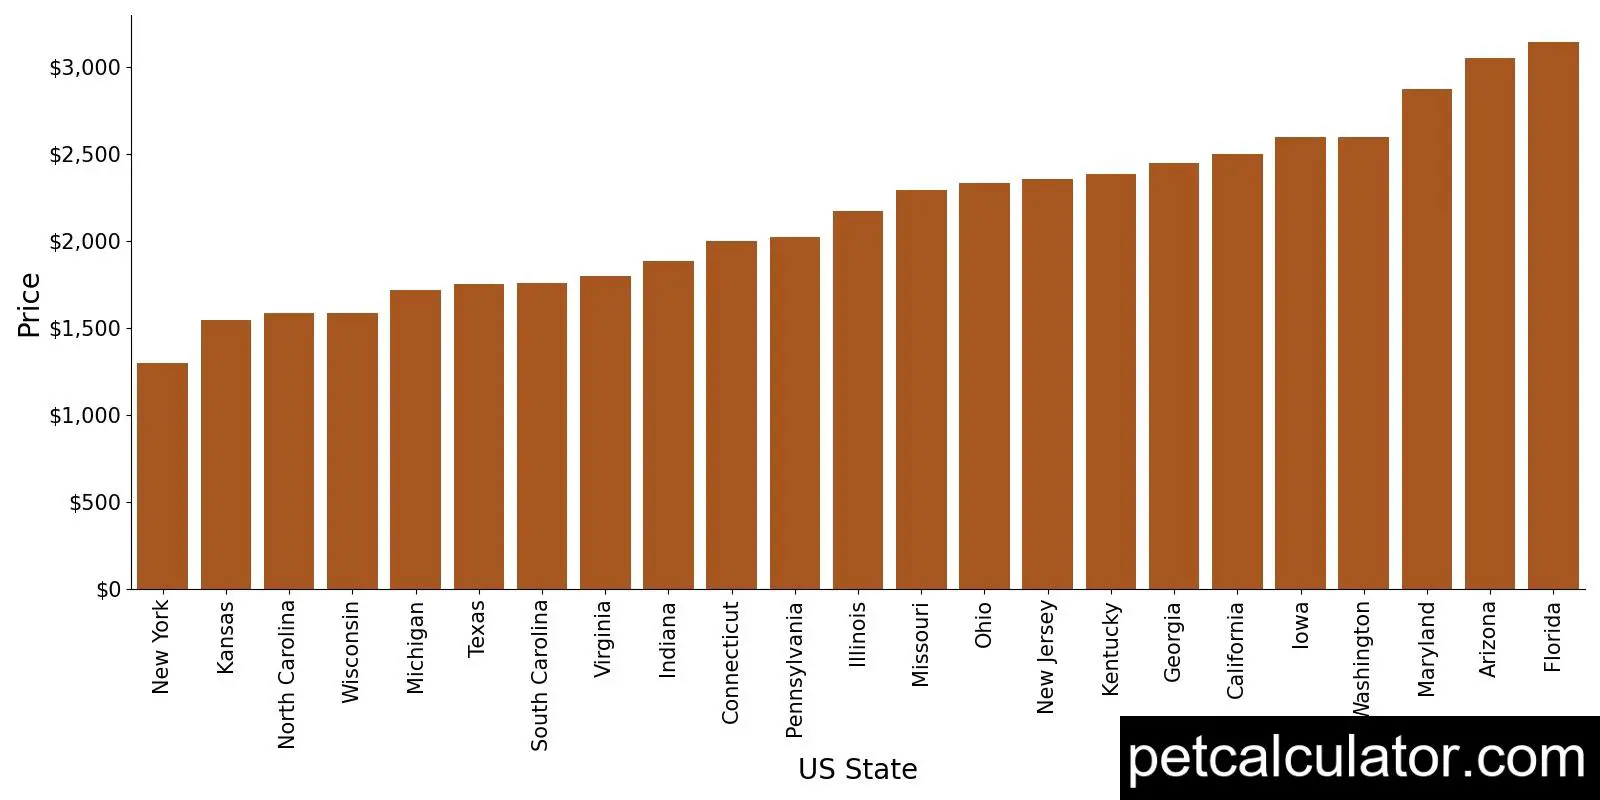 Price of Bich Poo by US State 